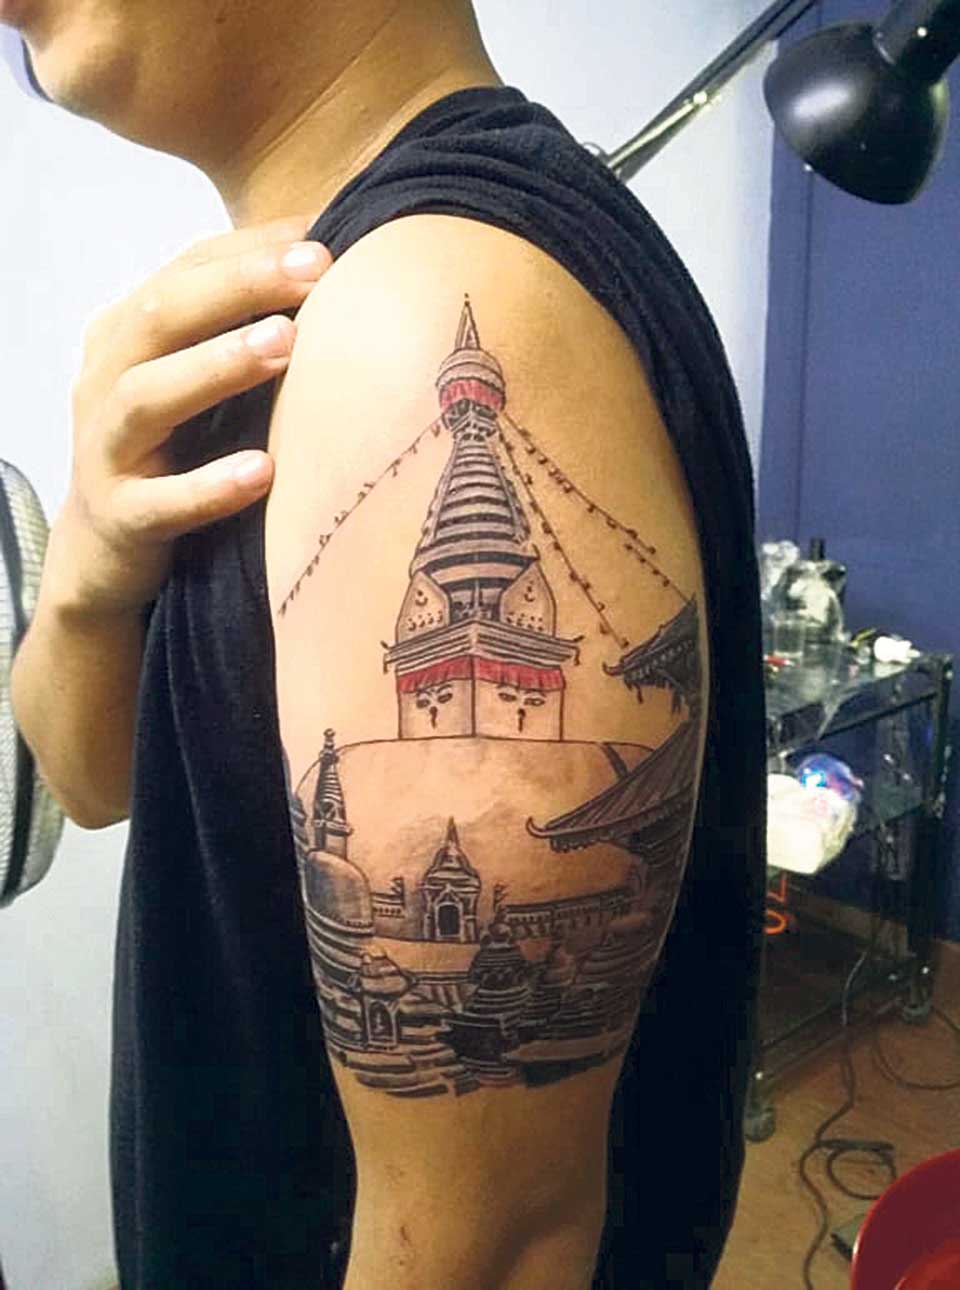 Top 5 Most Popular Masculine Tattoo Designs for Men Nepal  Tattoo Nepal   All About Tattoo in Nepal